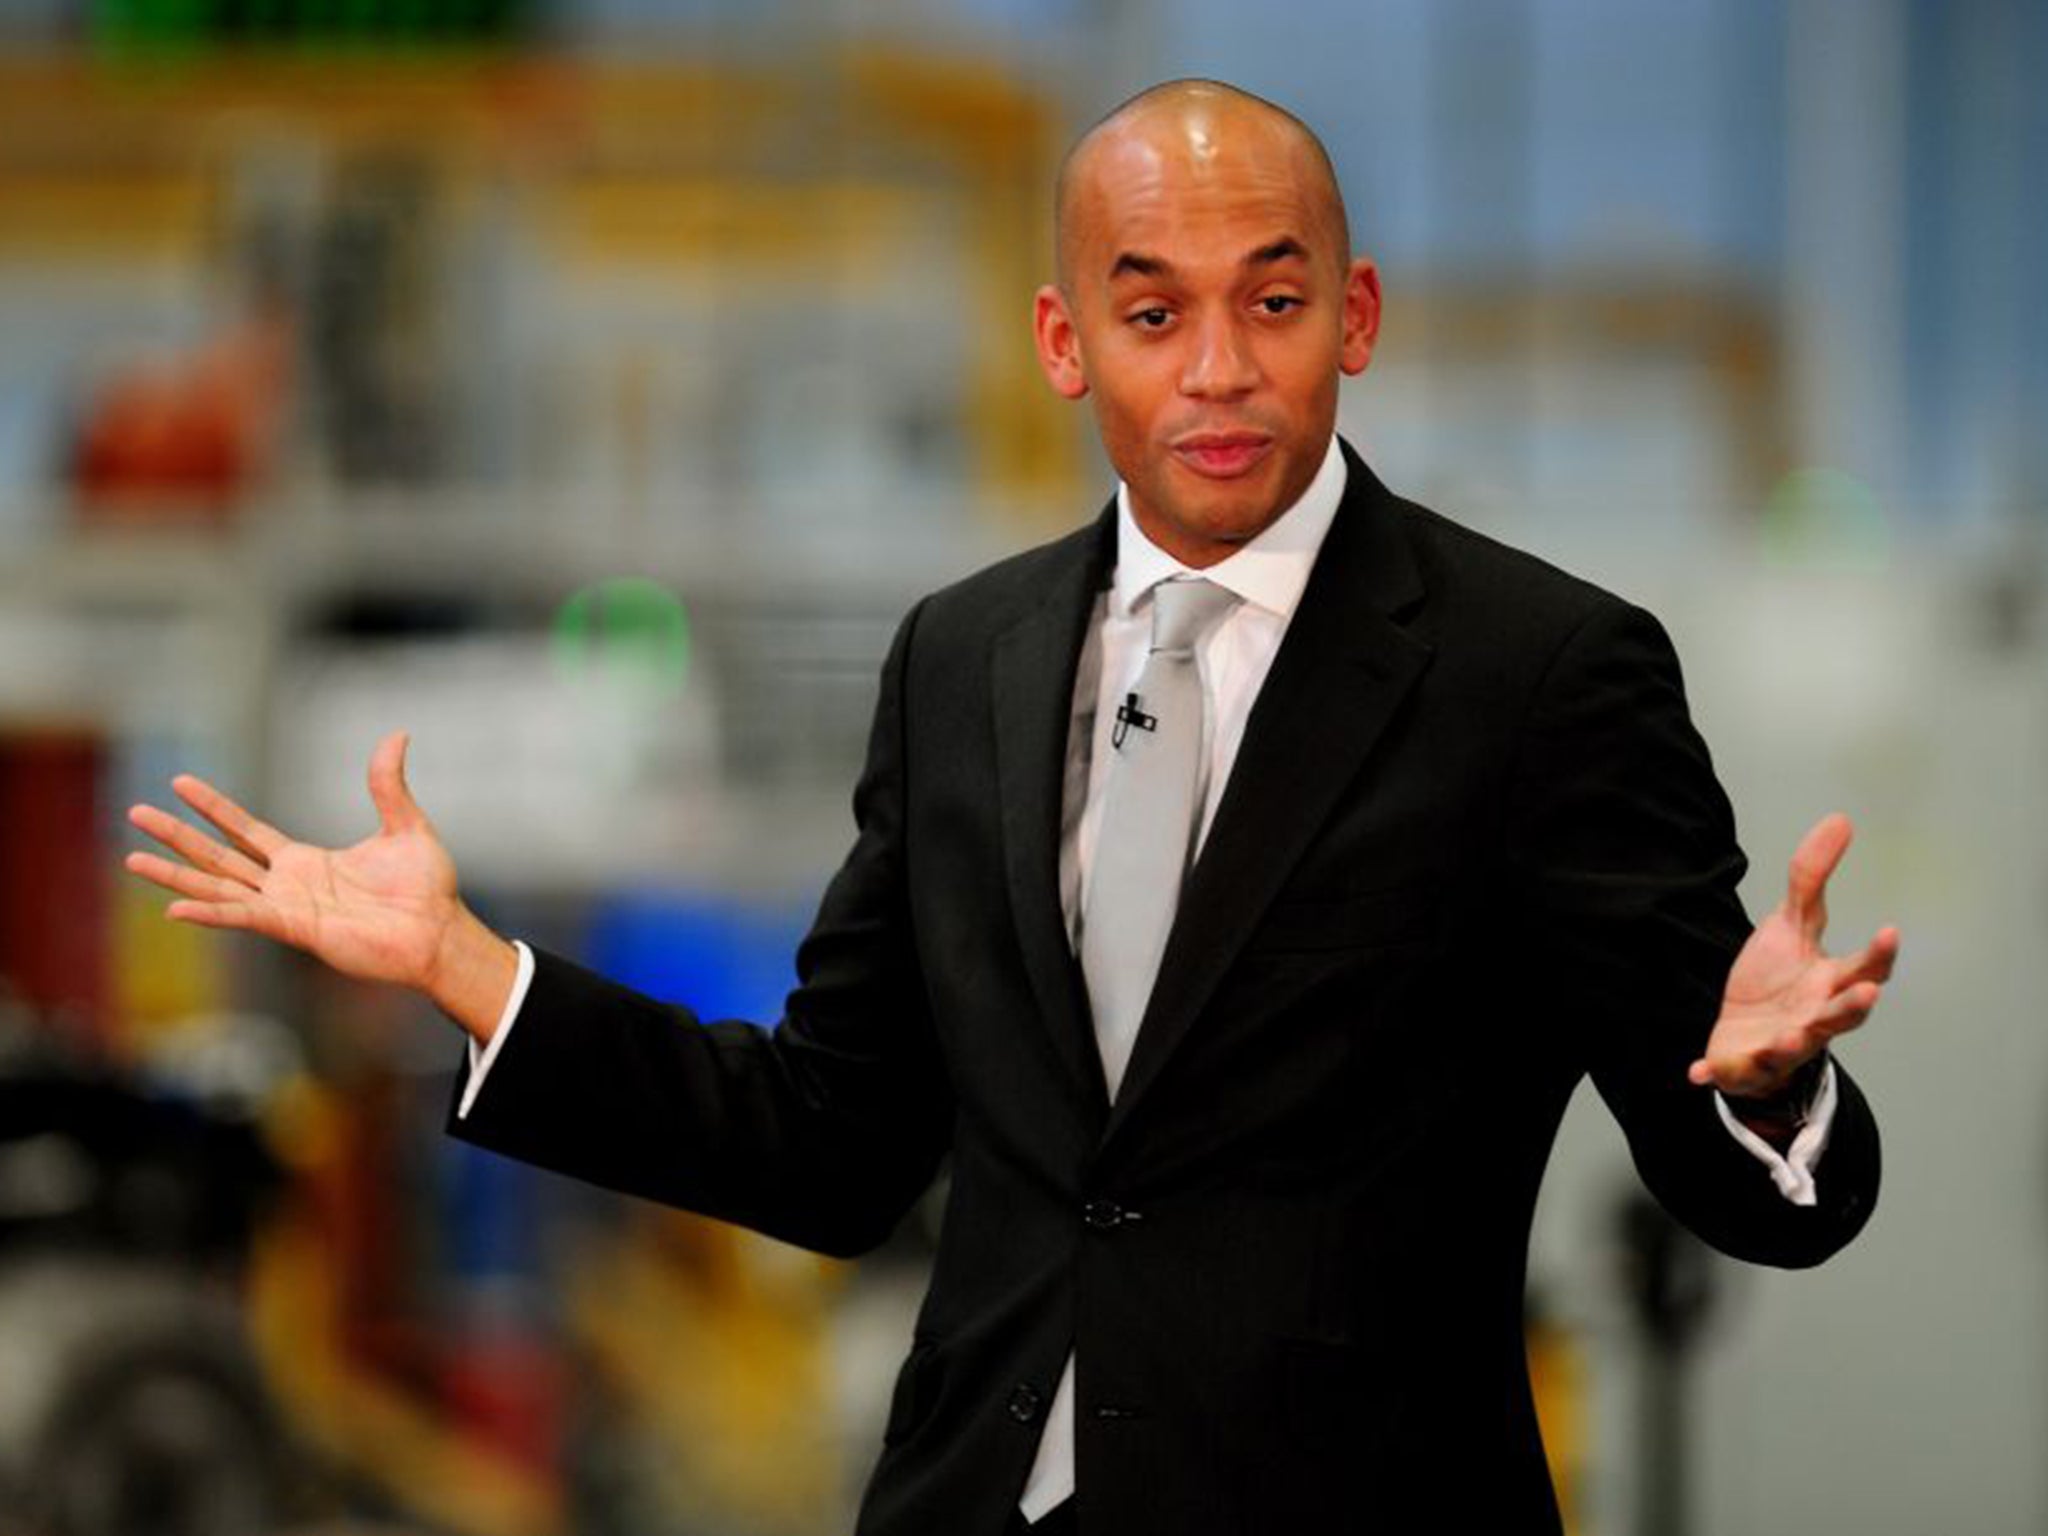 Chuka Umunna believes that that the last Labour government’s “fatal mistake” was overseeing an economy with “too few savings, too concentrated in too few sectors and regions of the UK, and too based around cheap credit”